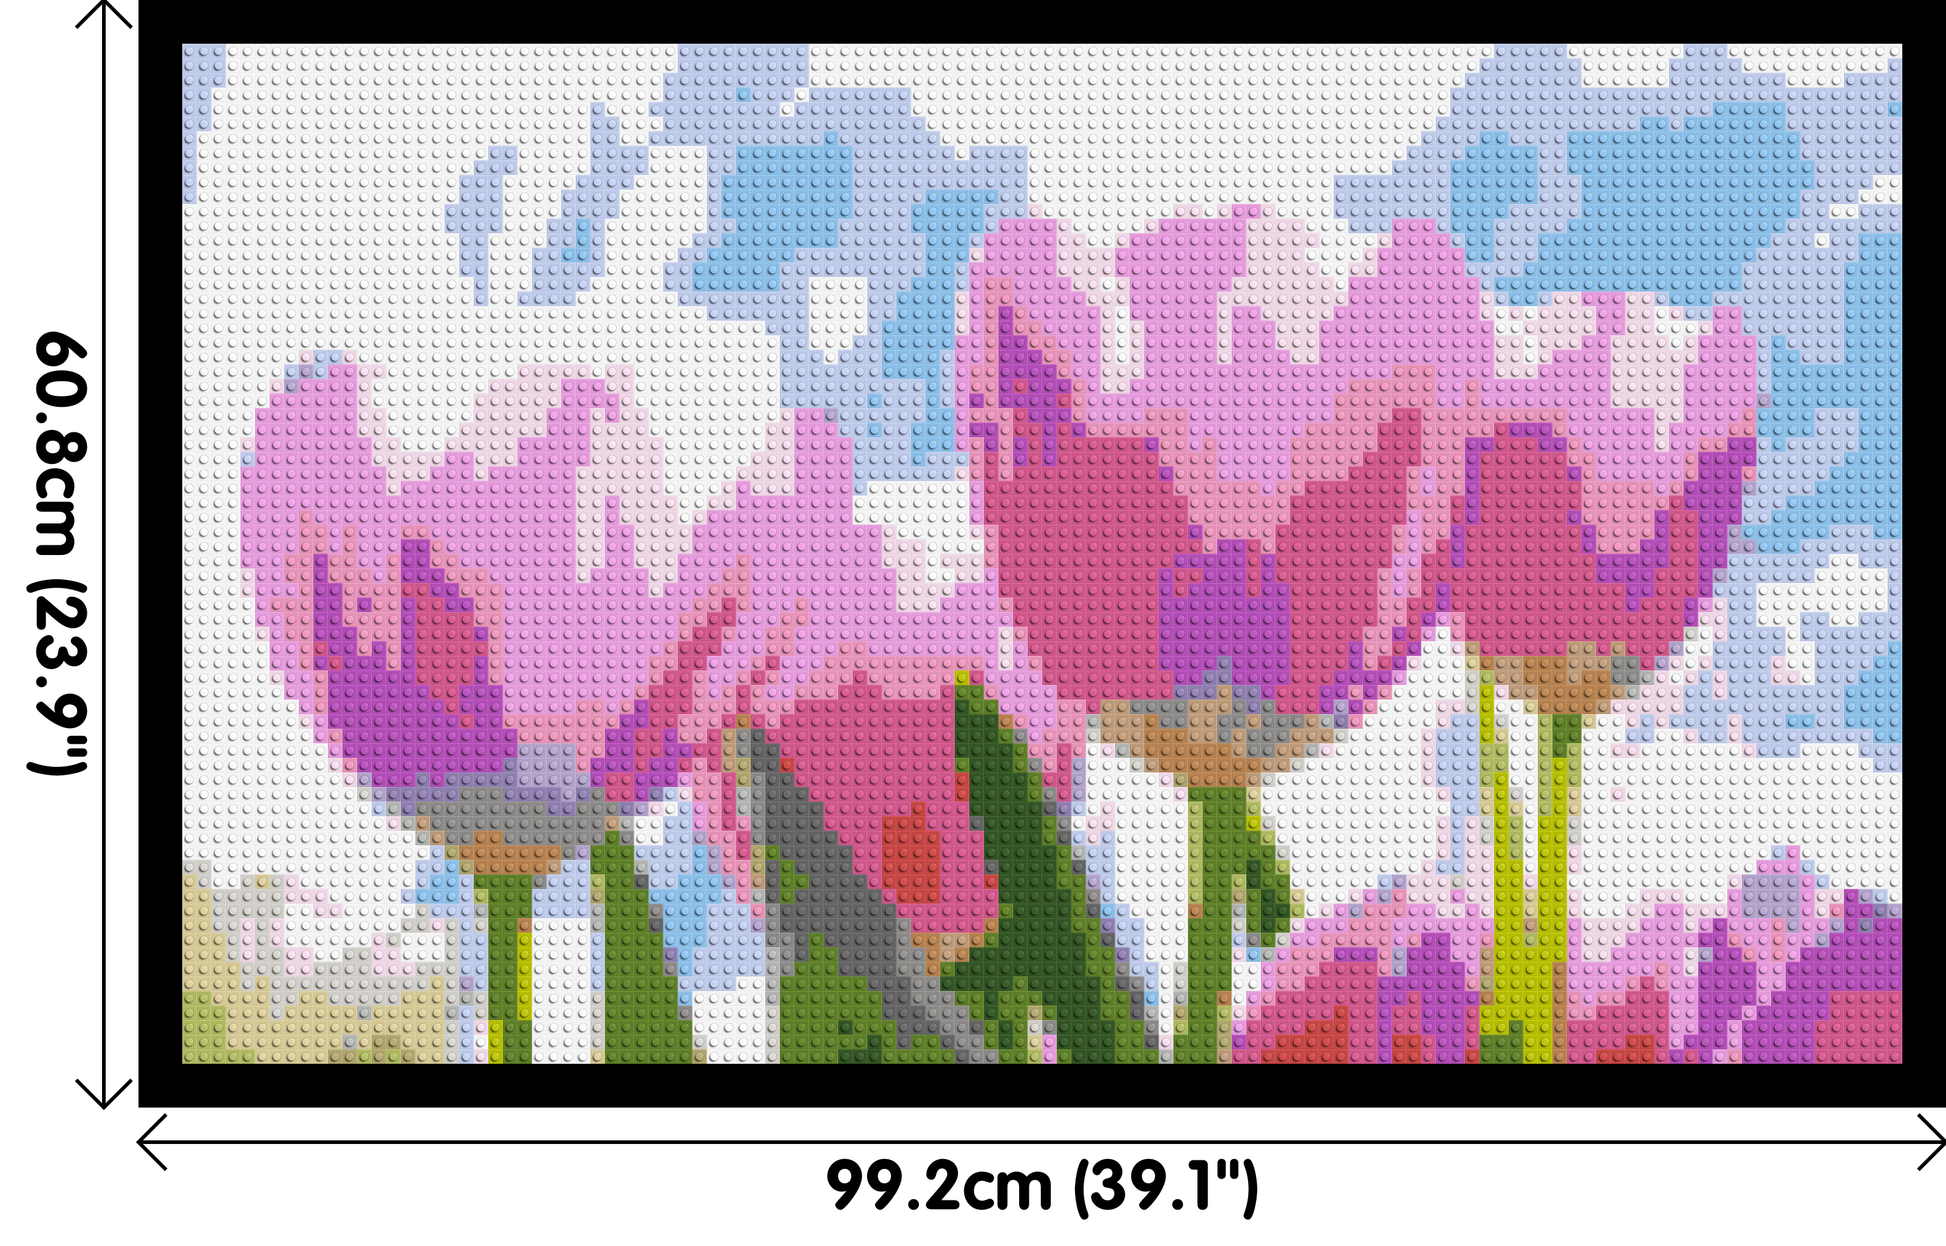 Pink Tulips - Brick Art Mosaic Kit 5x3 dimensions with frame